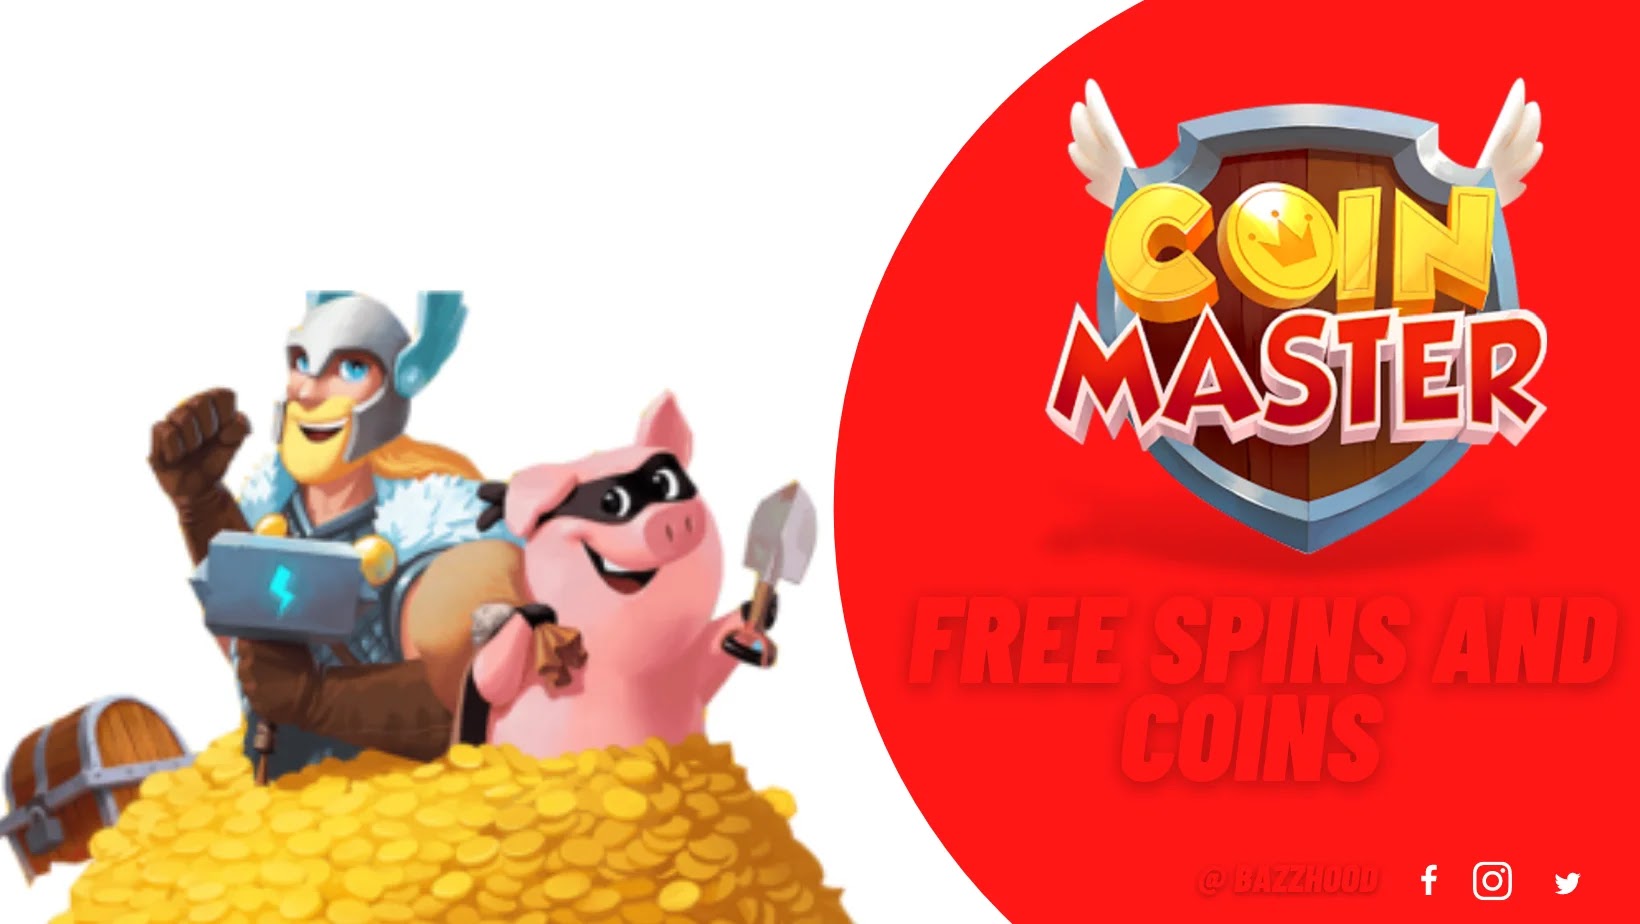 Coin Master daily free spins new links how to get free spins on Coin Master today 2021.